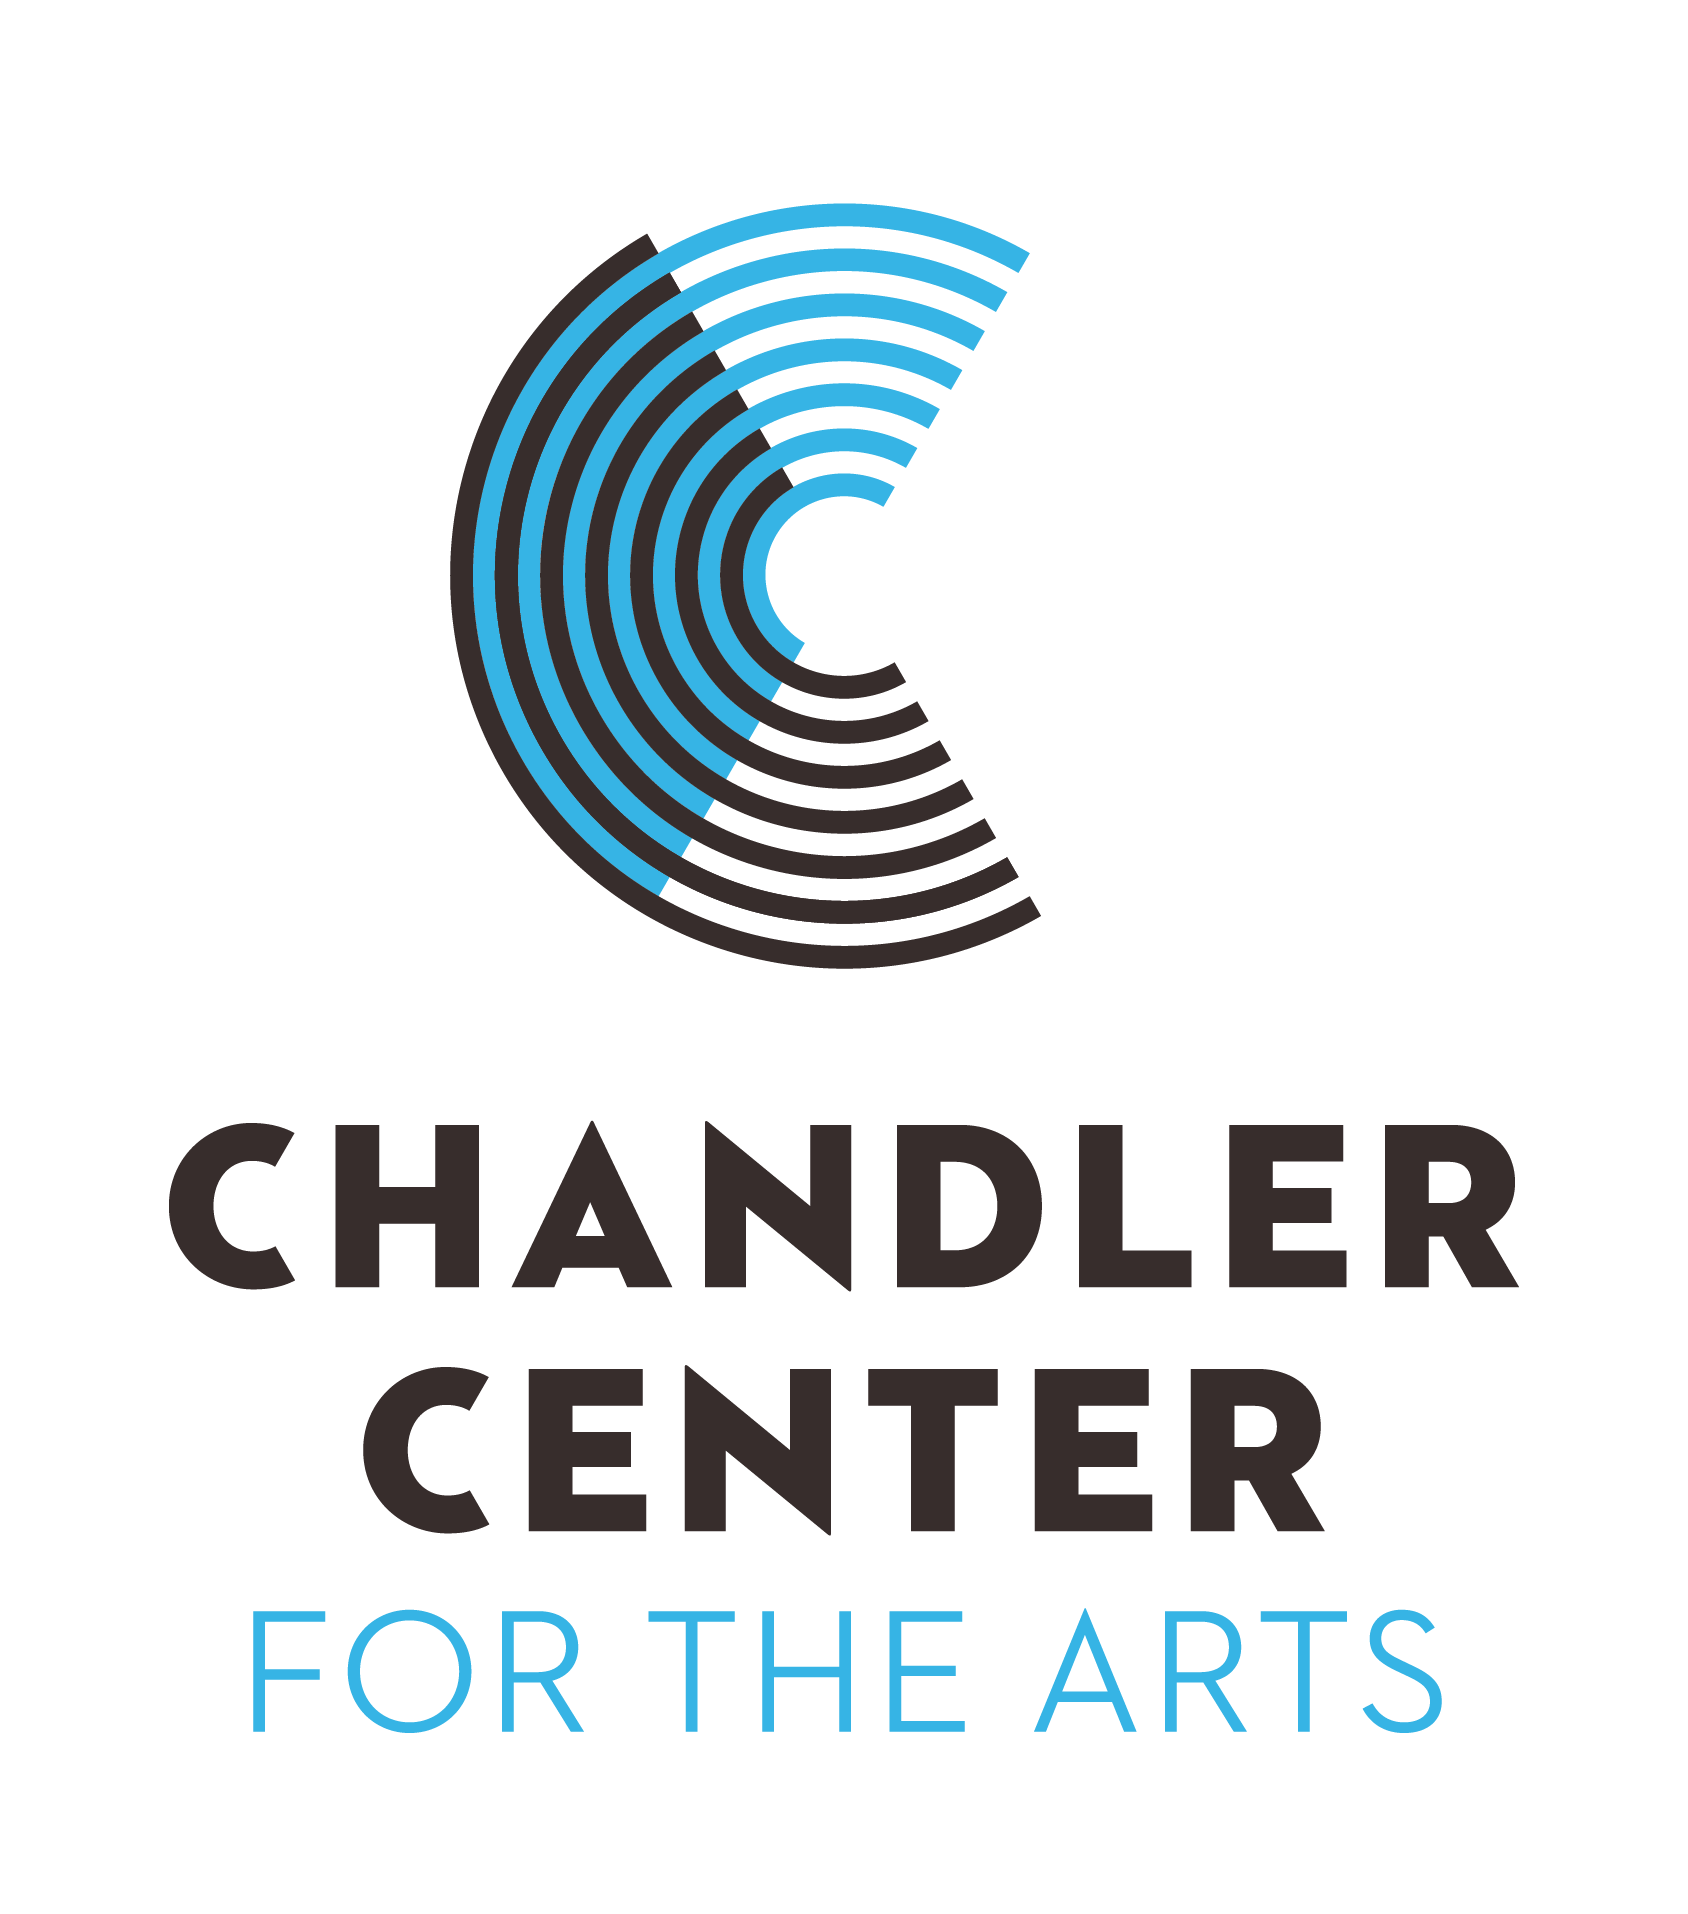 Chandler Center for the Arts logo design by logo designer Cause Design Co. for your inspiration and for the worlds largest logo competition